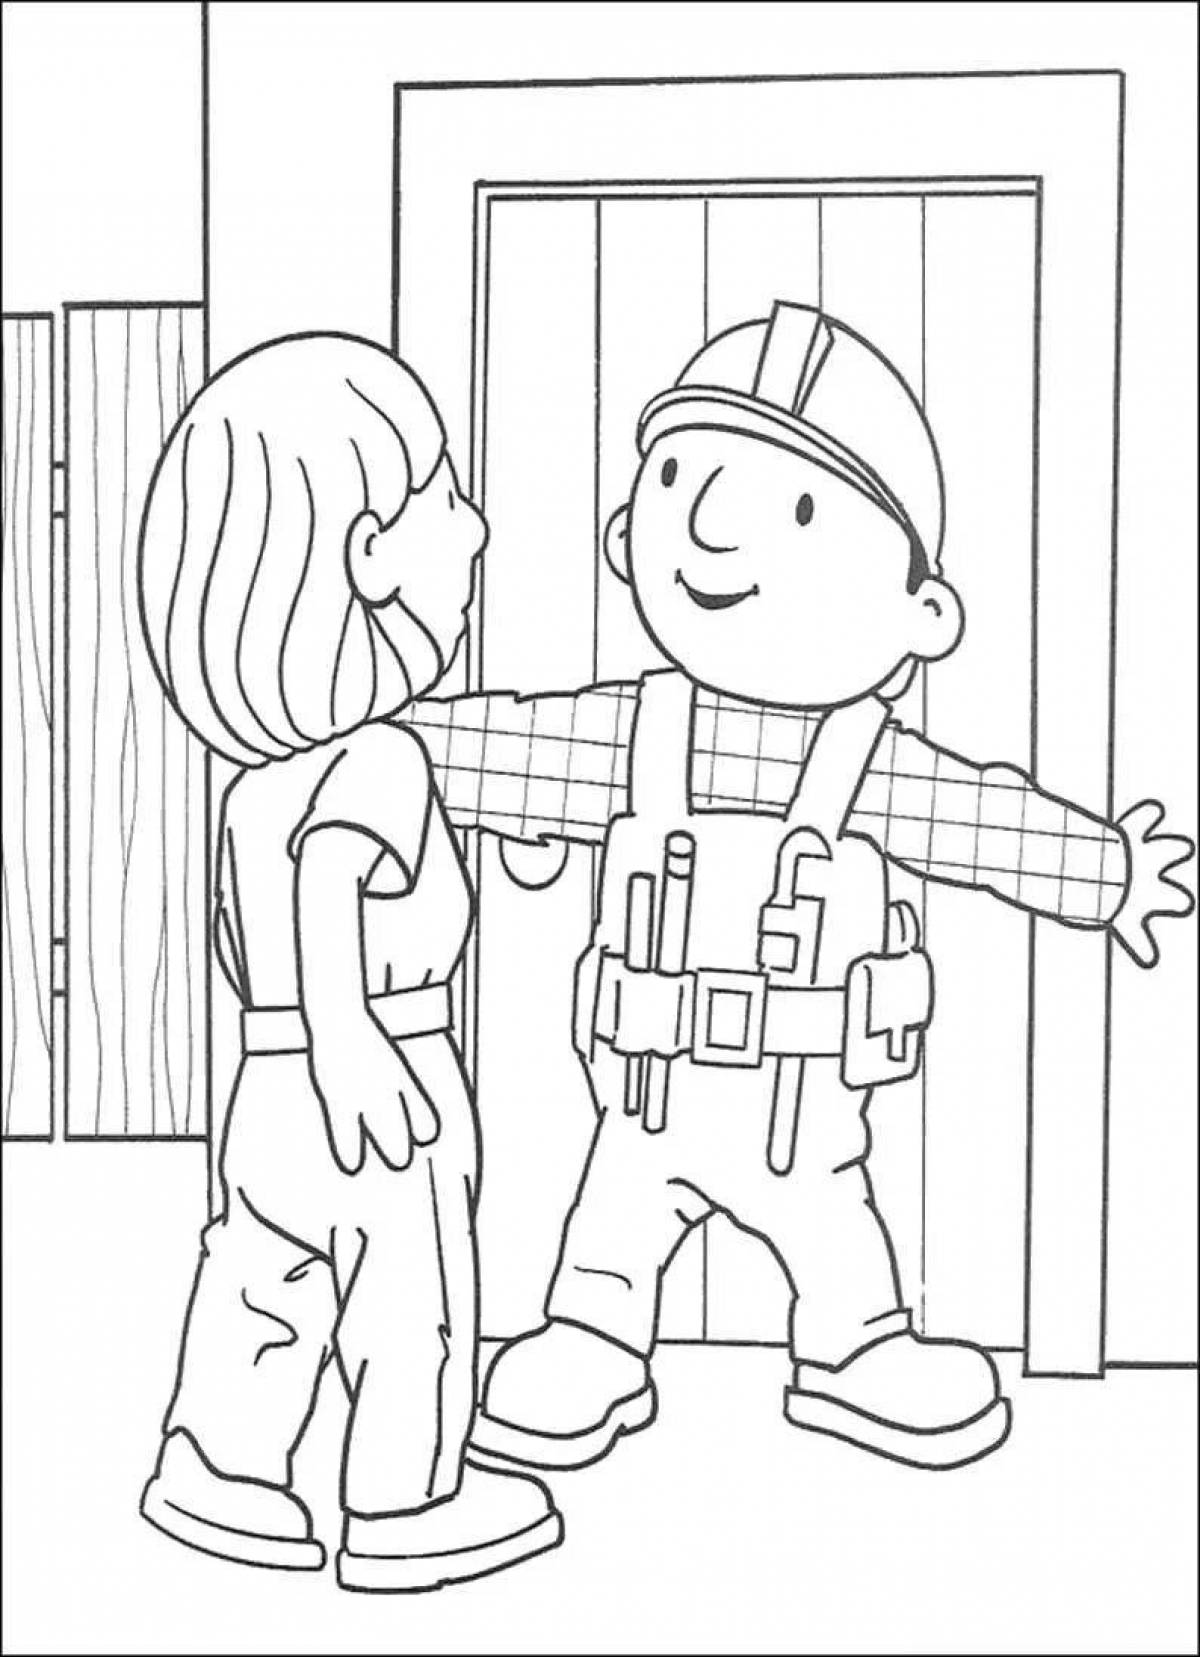 Color frenzy home alone safety coloring page